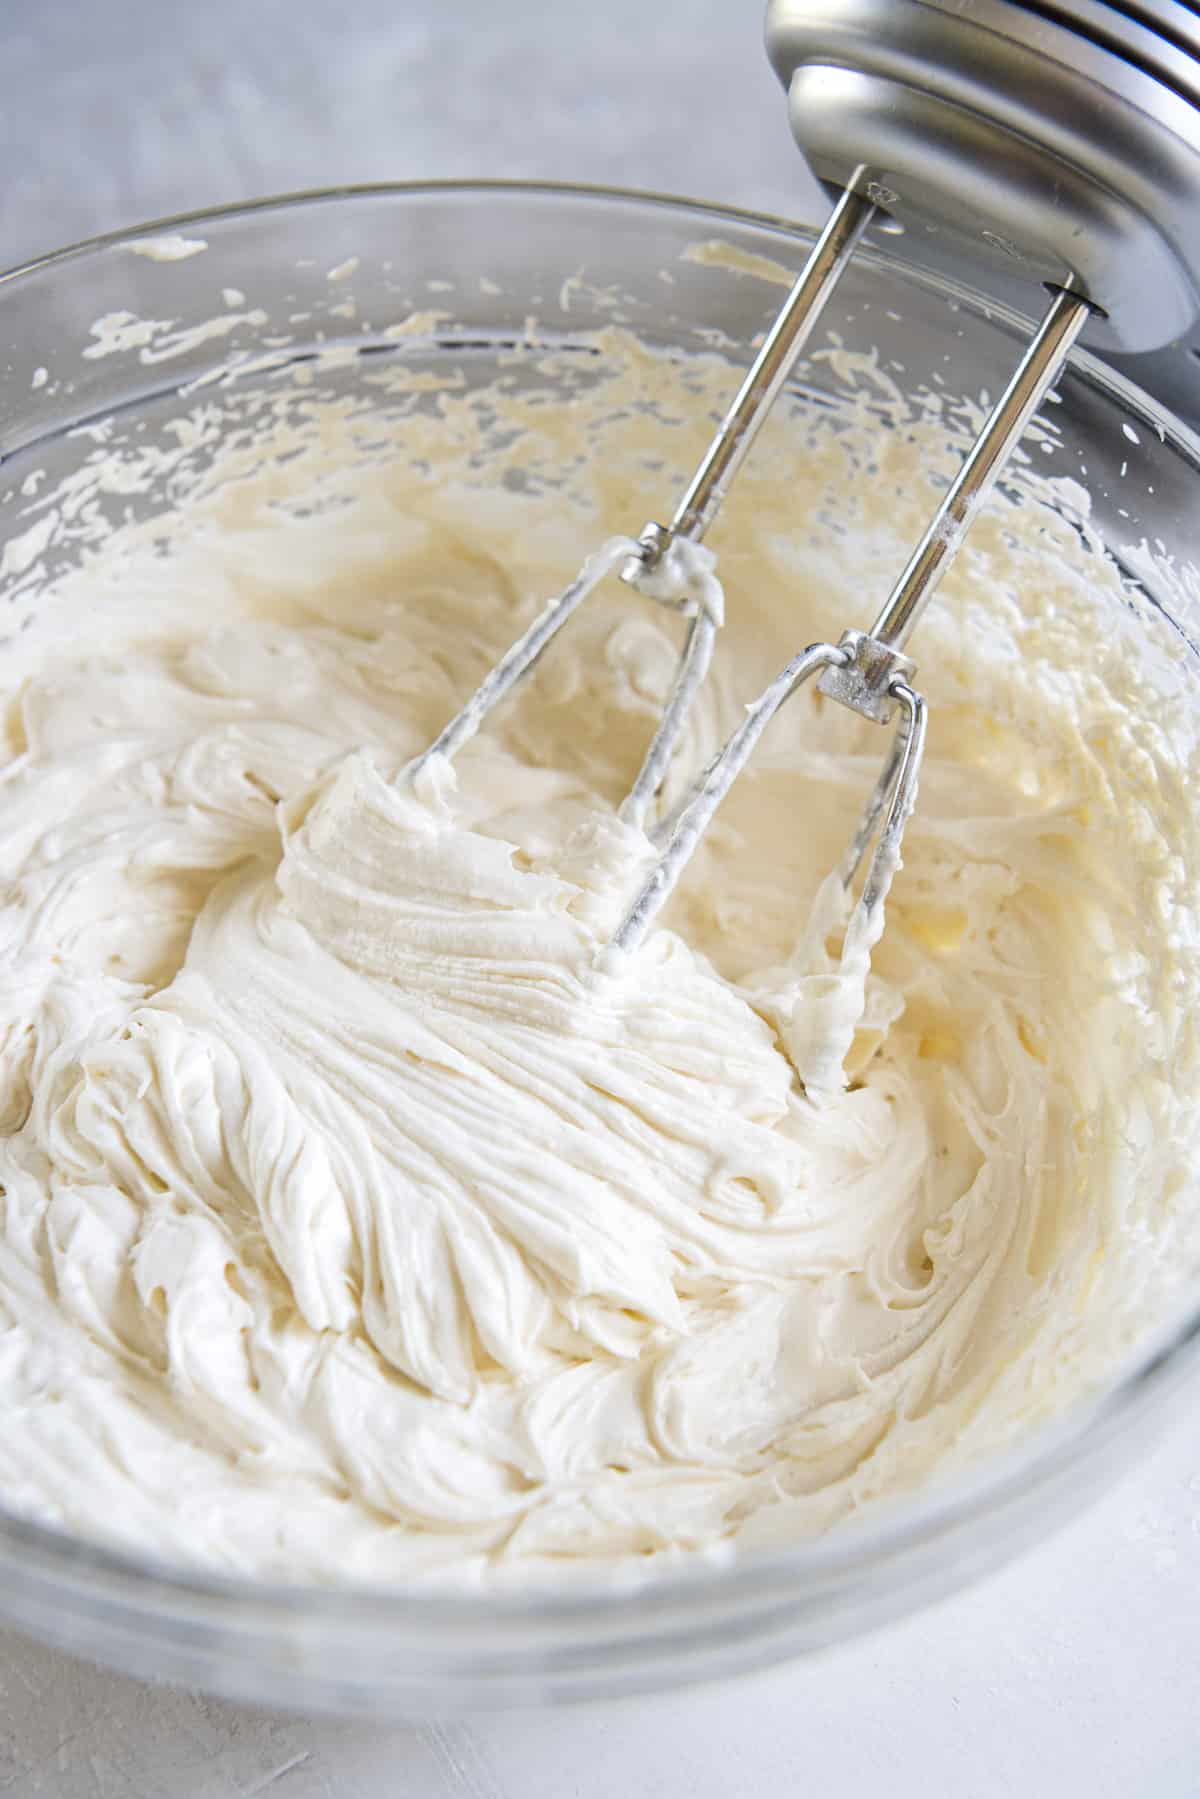 a bowl of whipped cream cheese frosting with a hand mixer set next to it